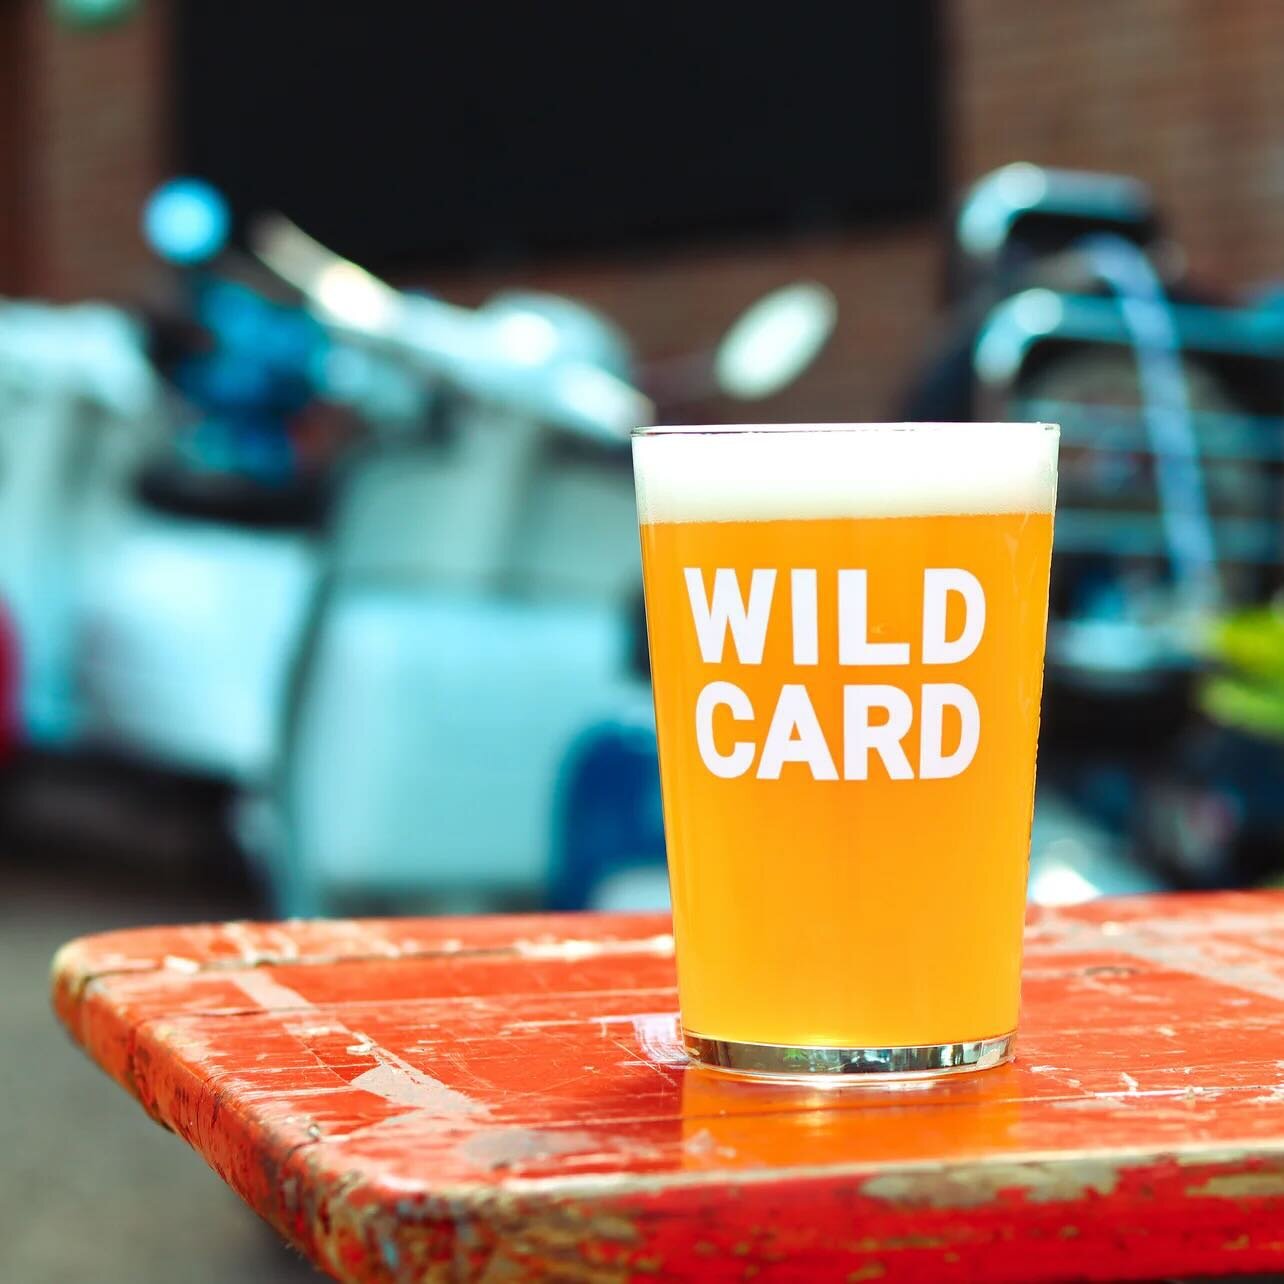 Have you tried Wild Card&rsquo;s International Women&rsquo;s Day contribution &lsquo;Main Hustle&rsquo;? This lovely can was designed by Anna Borup: &lsquo;As brewing is often considered a male-dominated industry, I loved being asked to celebrate the